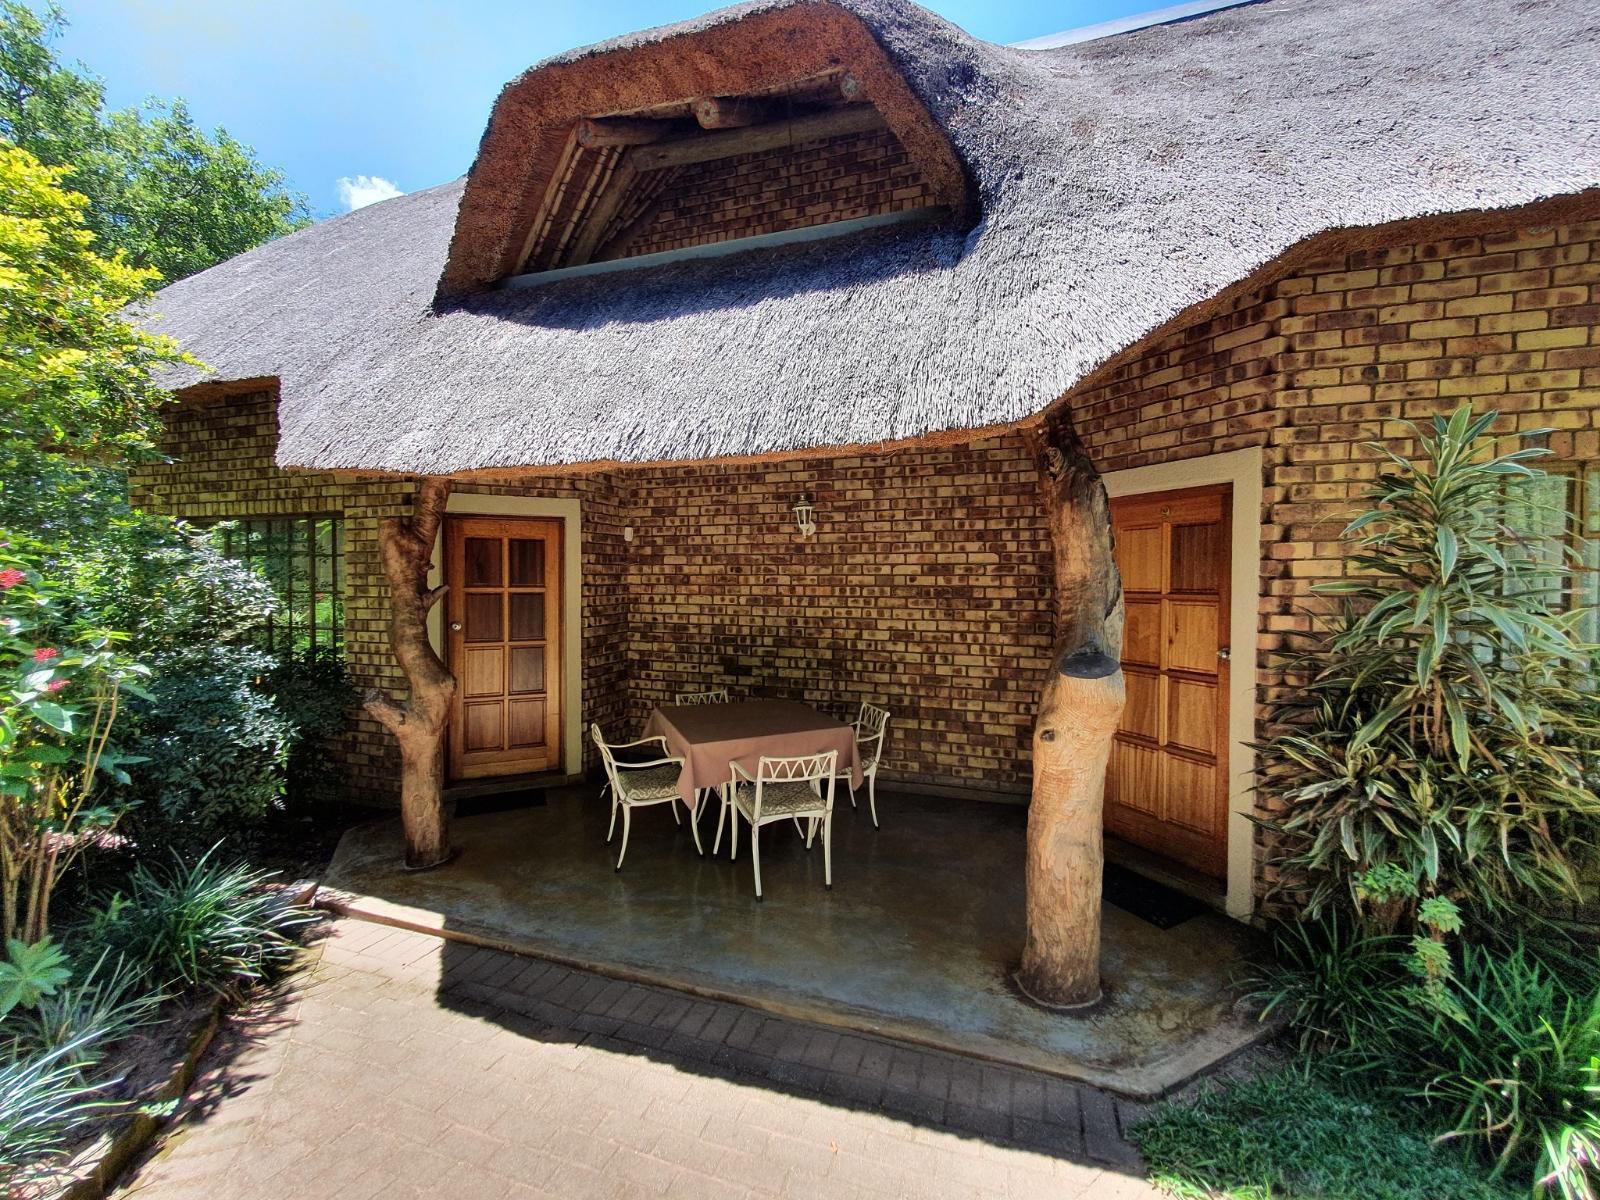 Shingalana Guest House Hazyview Mpumalanga South Africa House, Building, Architecture